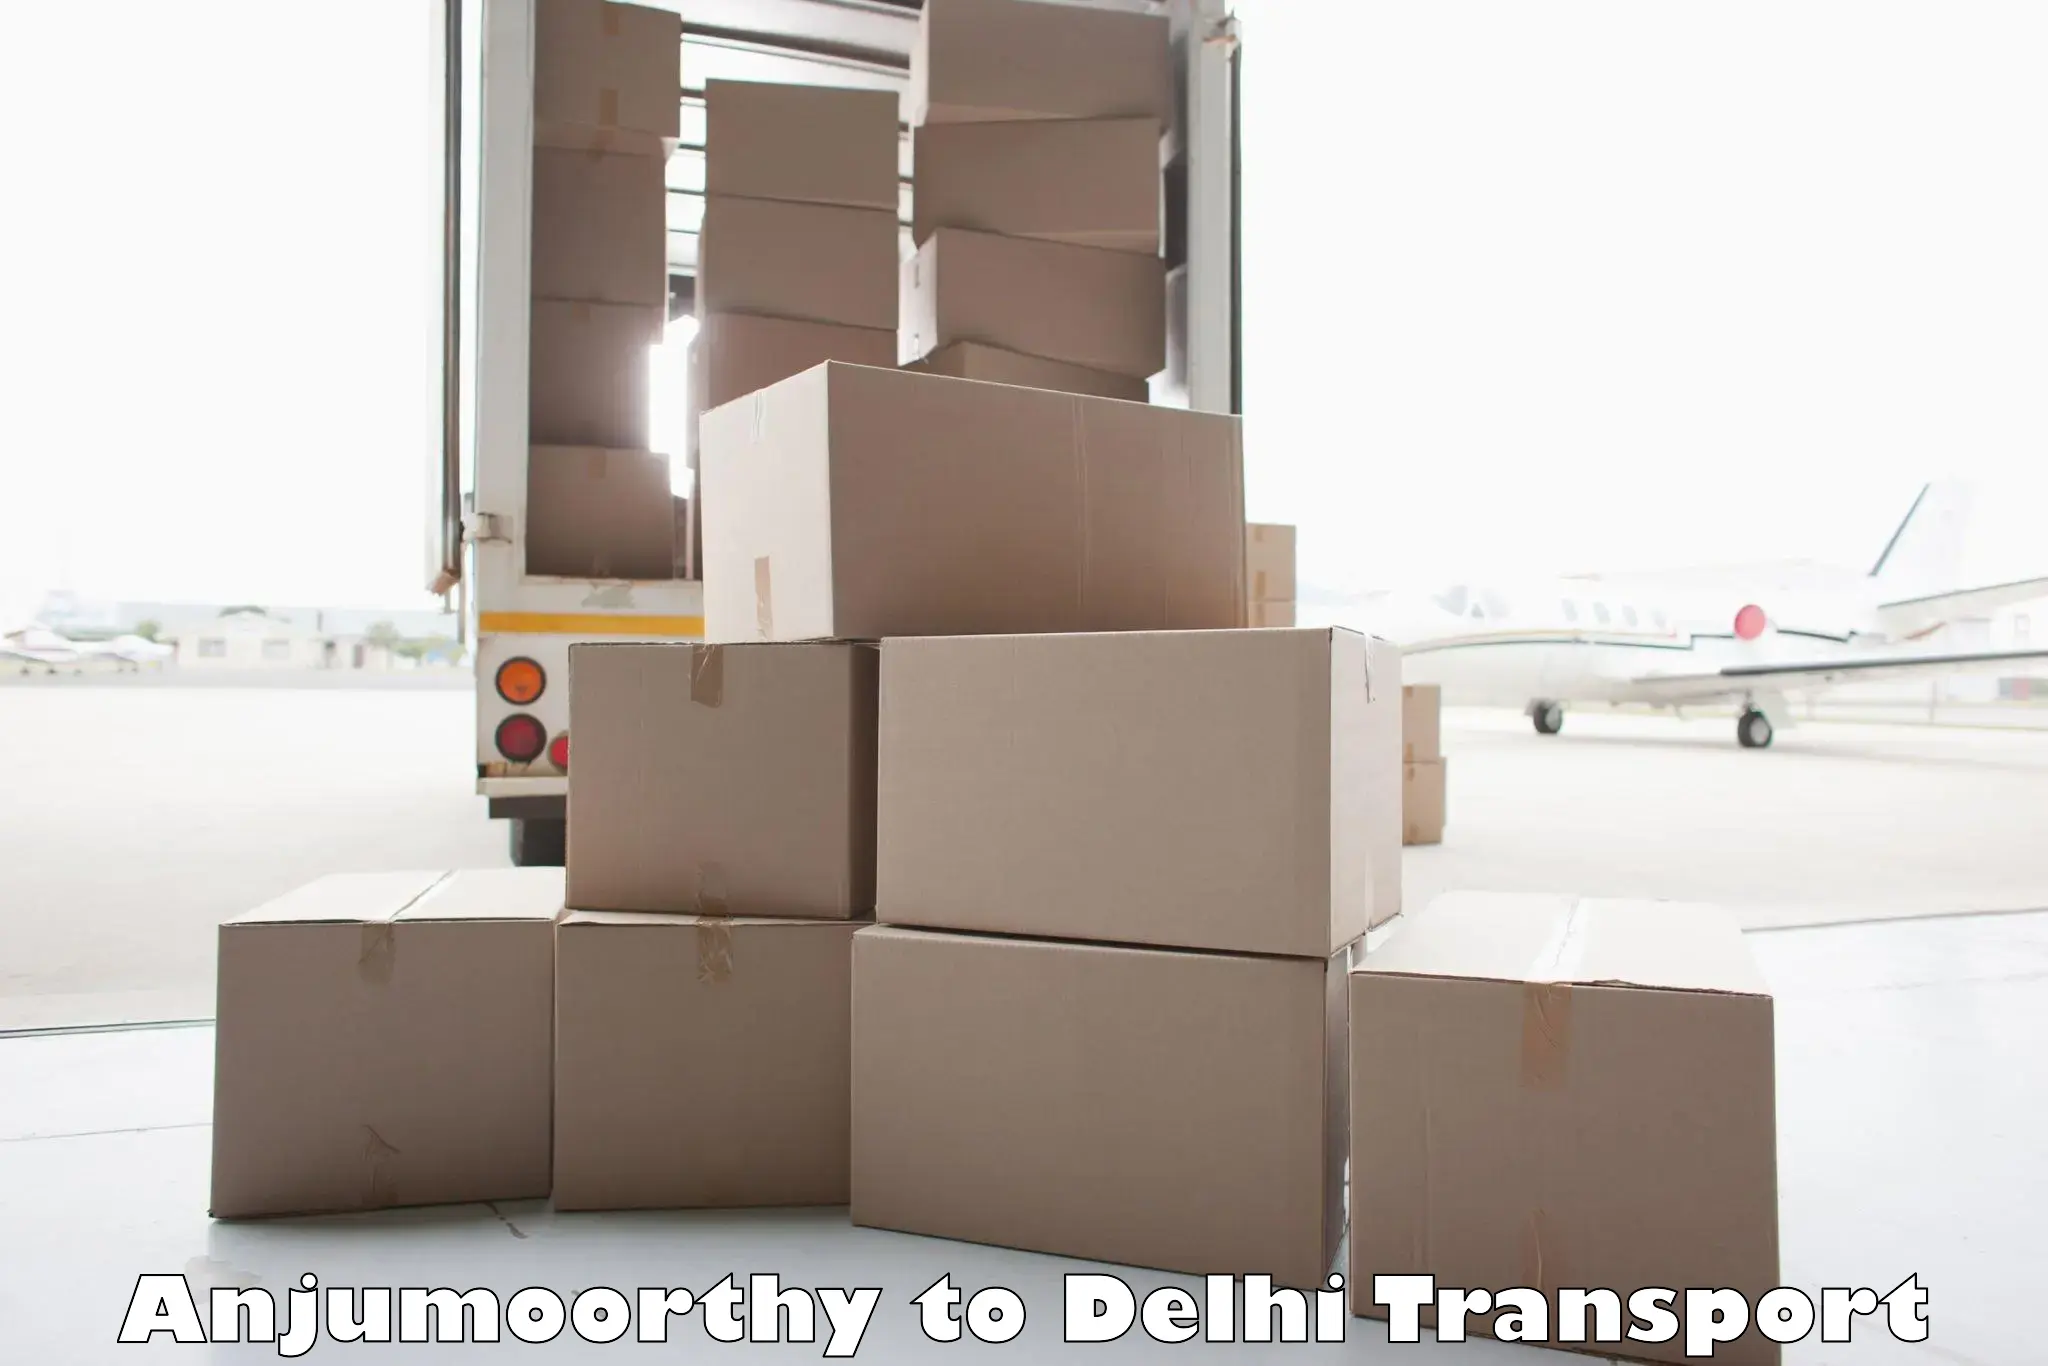 Air freight transport services Anjumoorthy to IIT Delhi